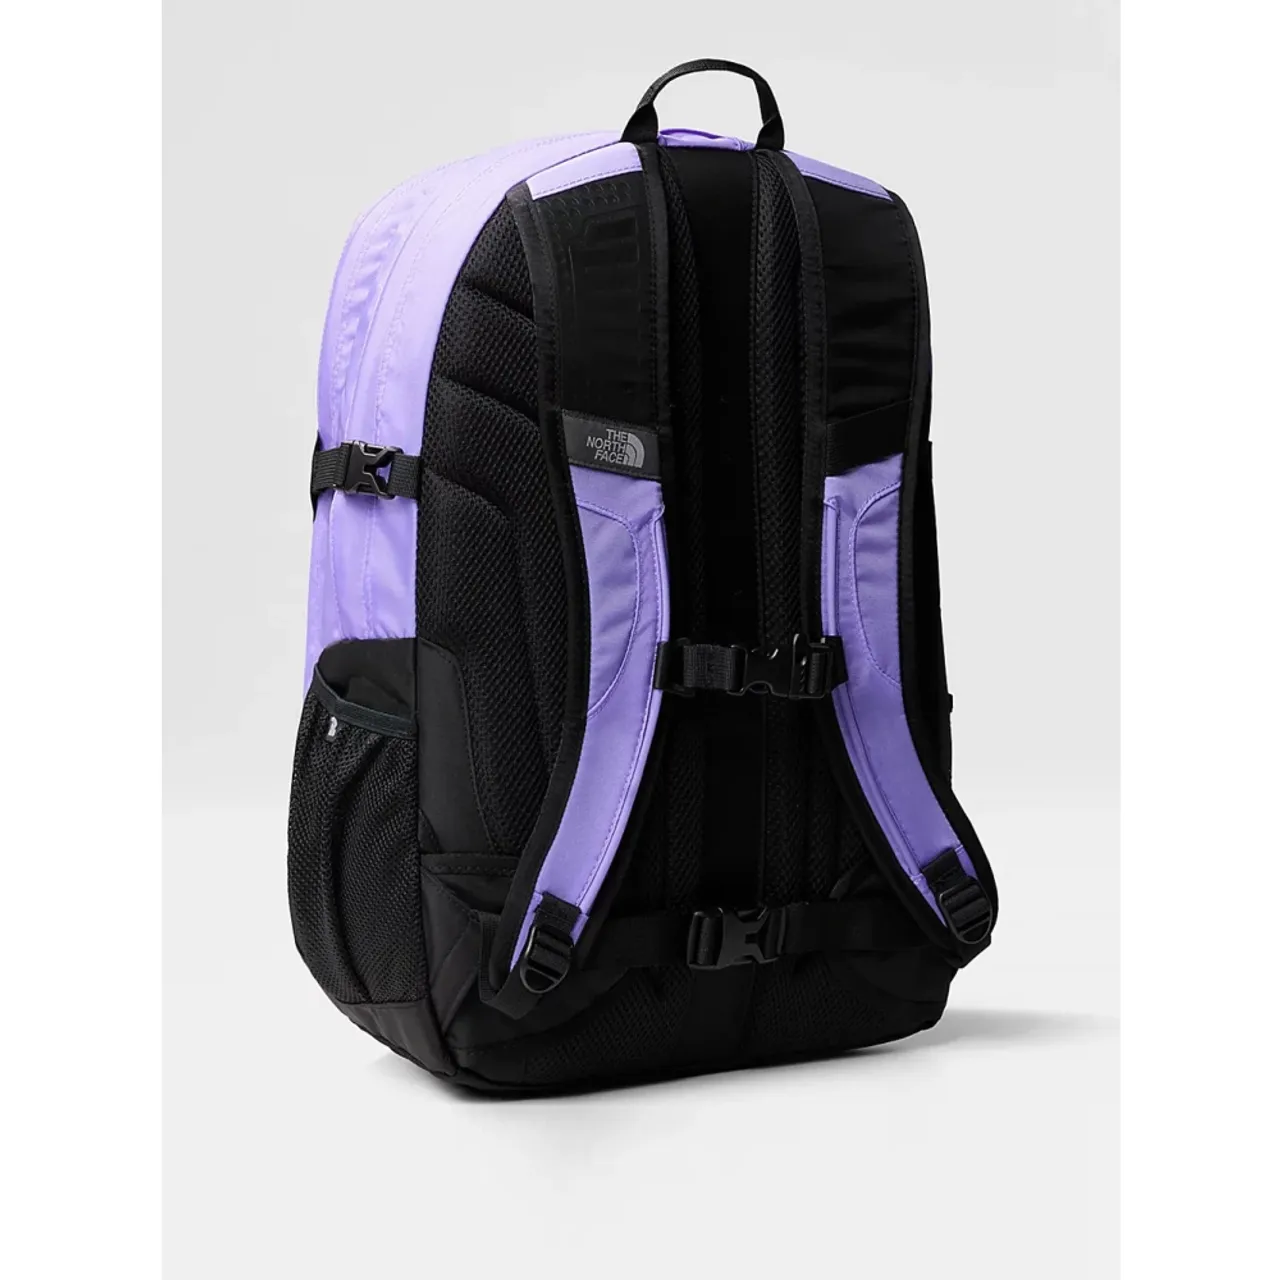 The North Face , Optic Violet/Nero Backpack ,Purple unisex, Sizes: ONE SIZE